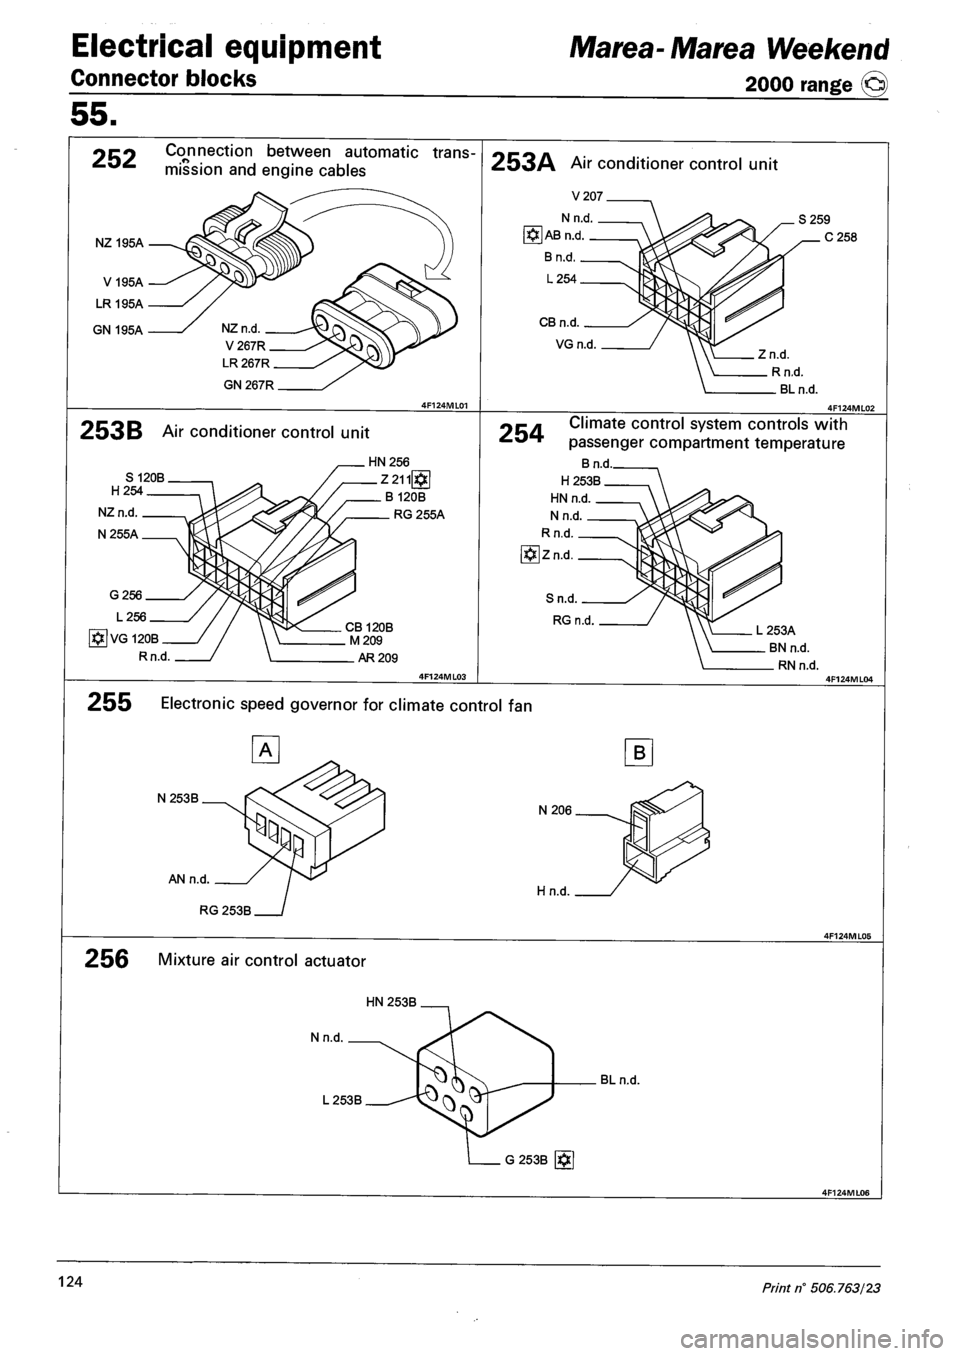 FIAT MAREA 2000 1.G User Guide Electrical equipment 
Connector blocks 
Marea-Marea Weekend 
2000 range © 
55. 
pep Connection between automatic trans¬
mission and engine cables 
NZ 195A 
V 195A 
LR 195A 
GN 195A 
253B Air conditi